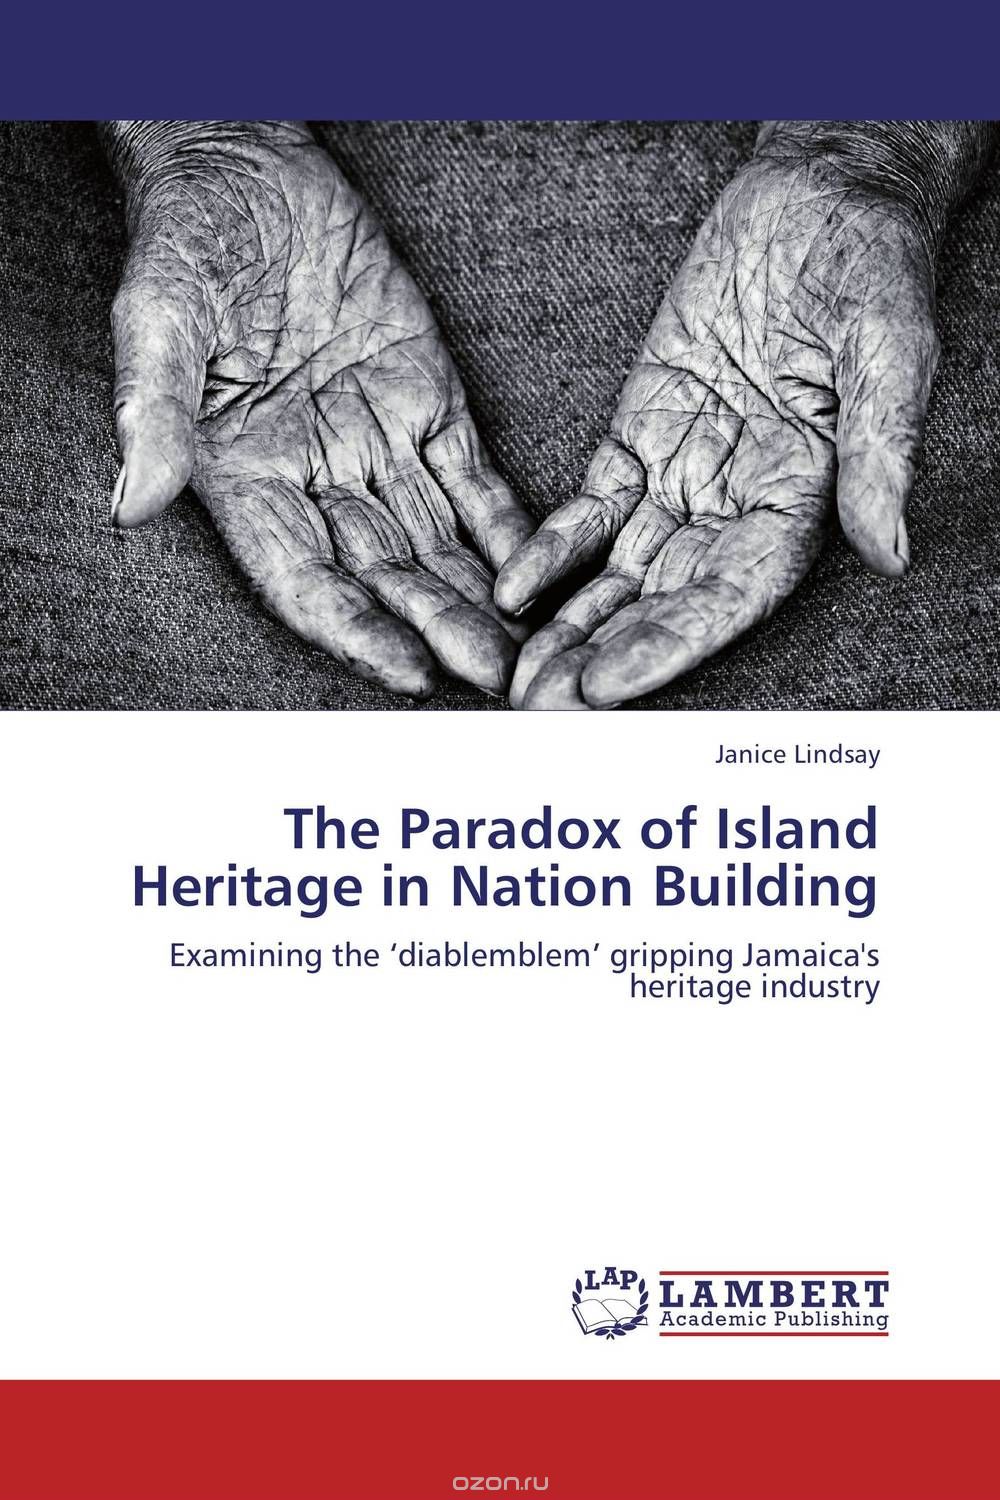 The Paradox of Island Heritage in Nation Building